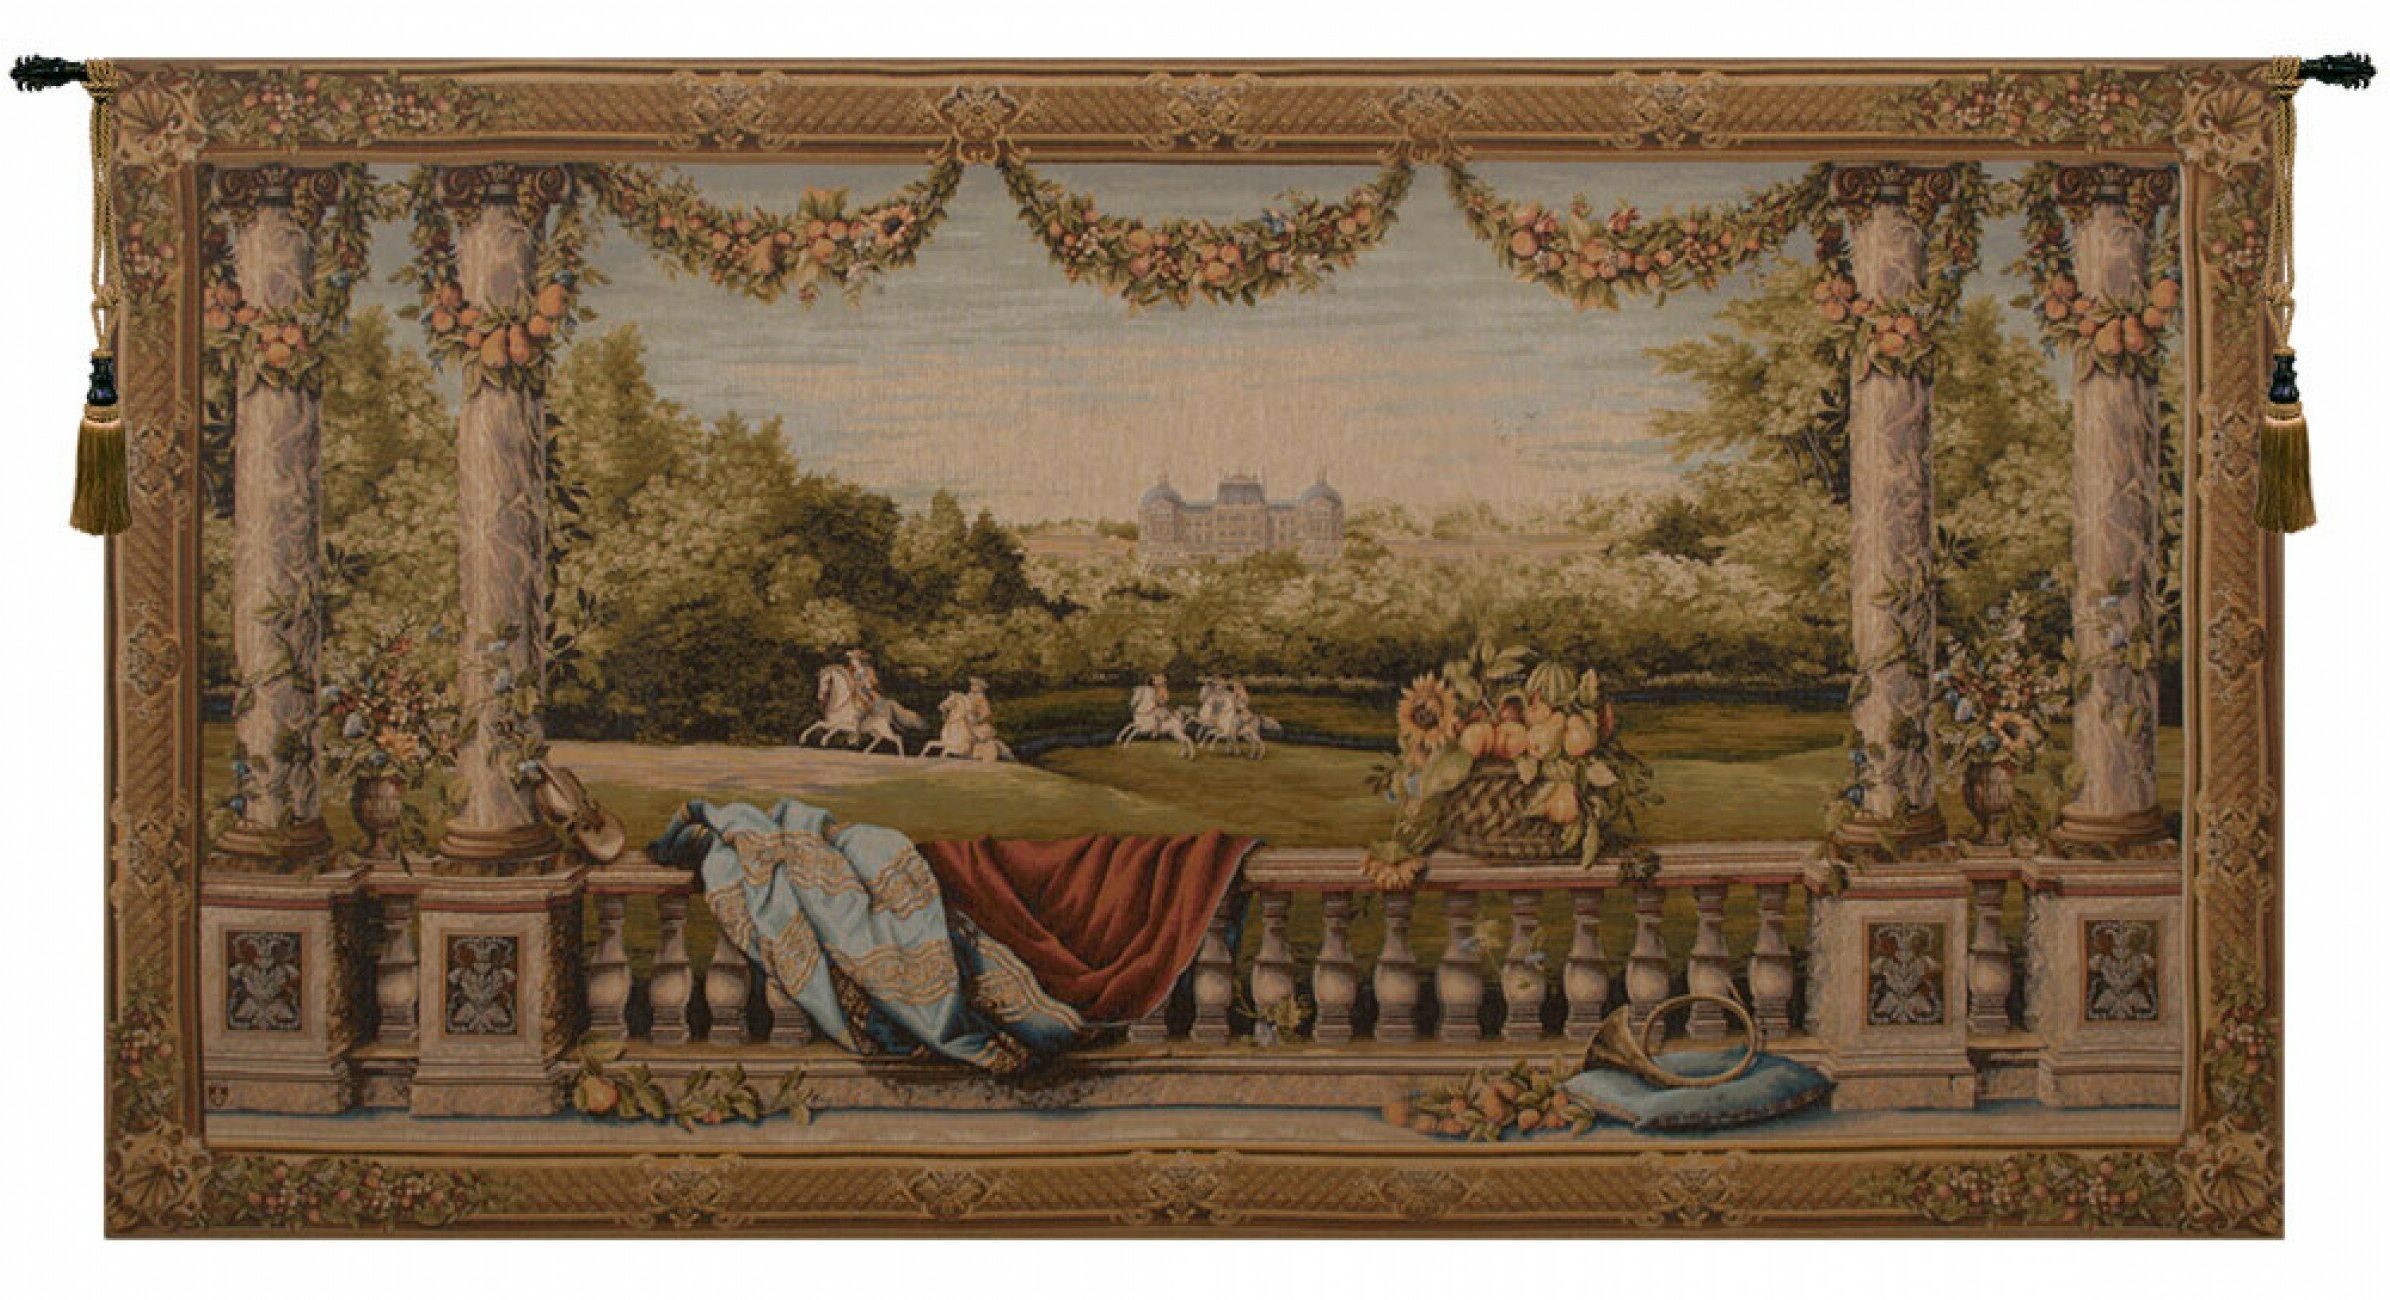 Chateau Bellevue I European Tapestry Throughout Widely Used Blended Fabric Chateau Bellevue European Tapestries (View 2 of 20)